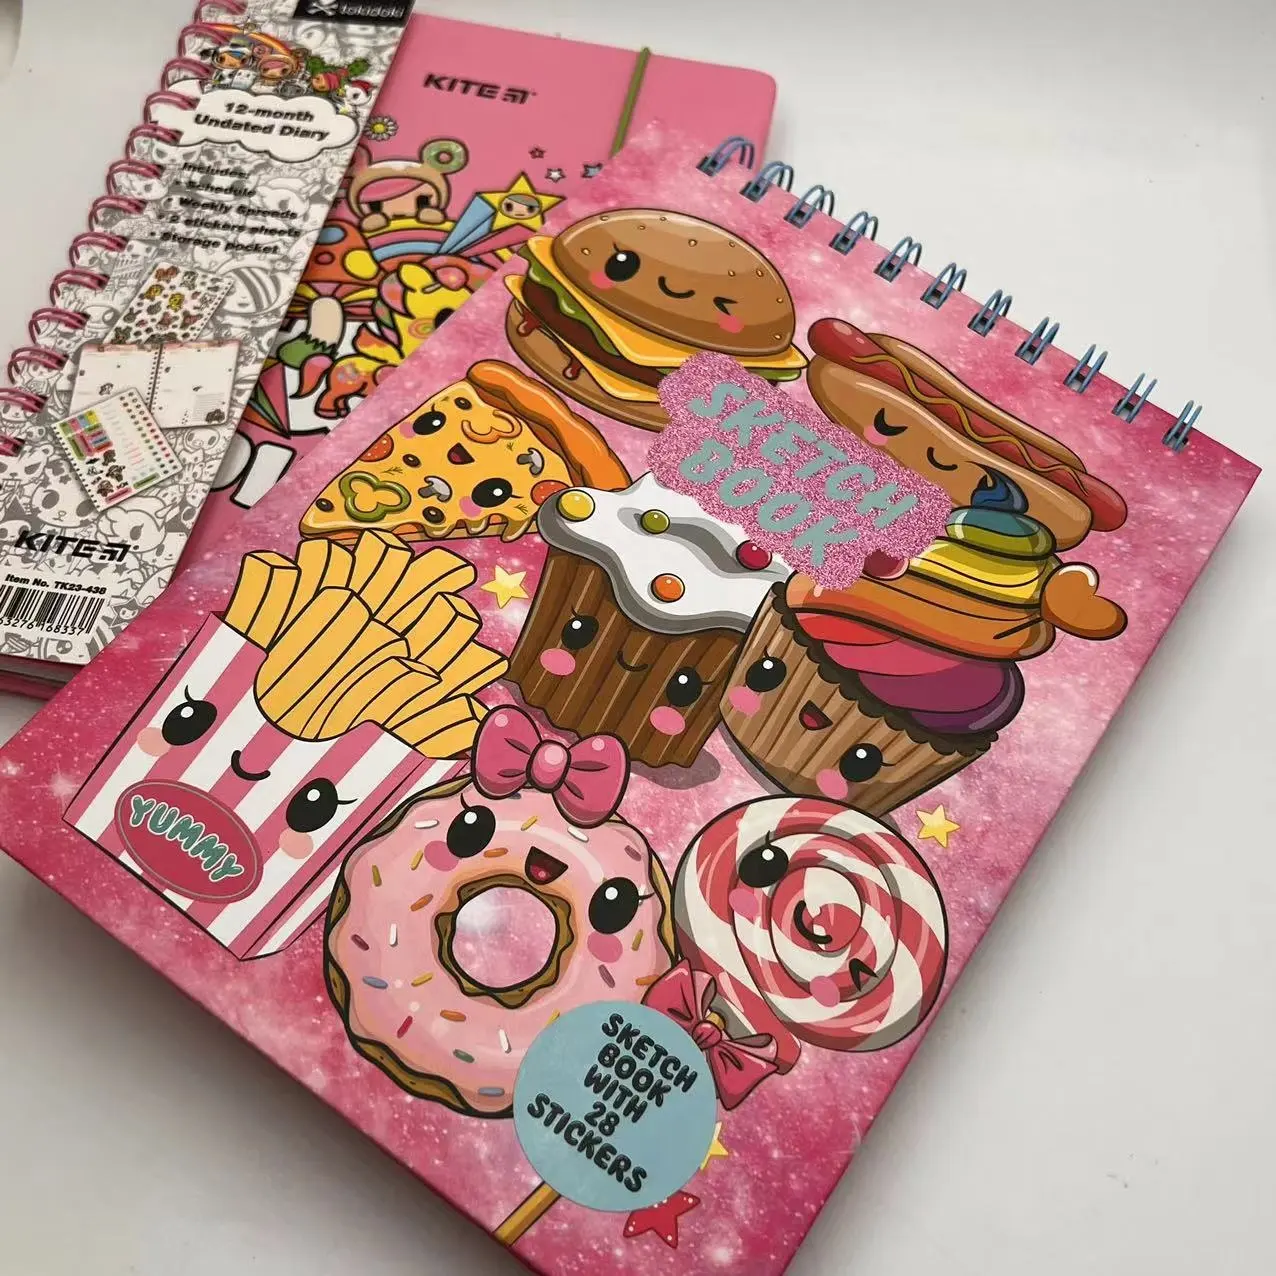 Wholesales Cheap Custom Donut Hamburger Colour Printing Sketch Book With 28 Stickers Spiral Diary Journal For Students